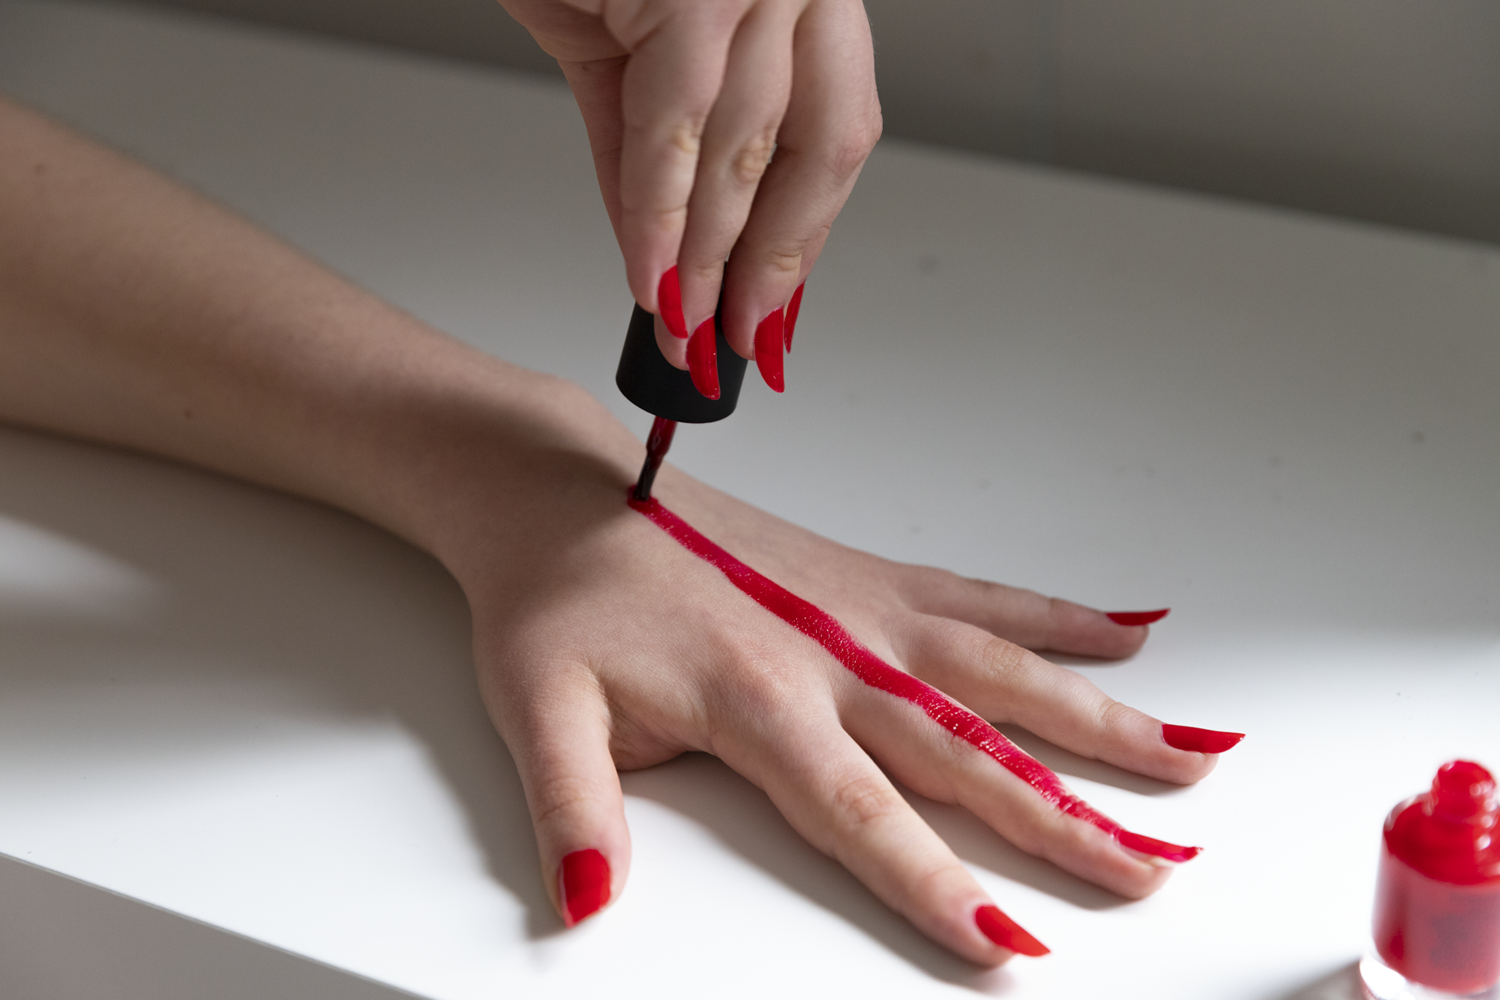 Colour photograph of hand being painted with red nail polish.